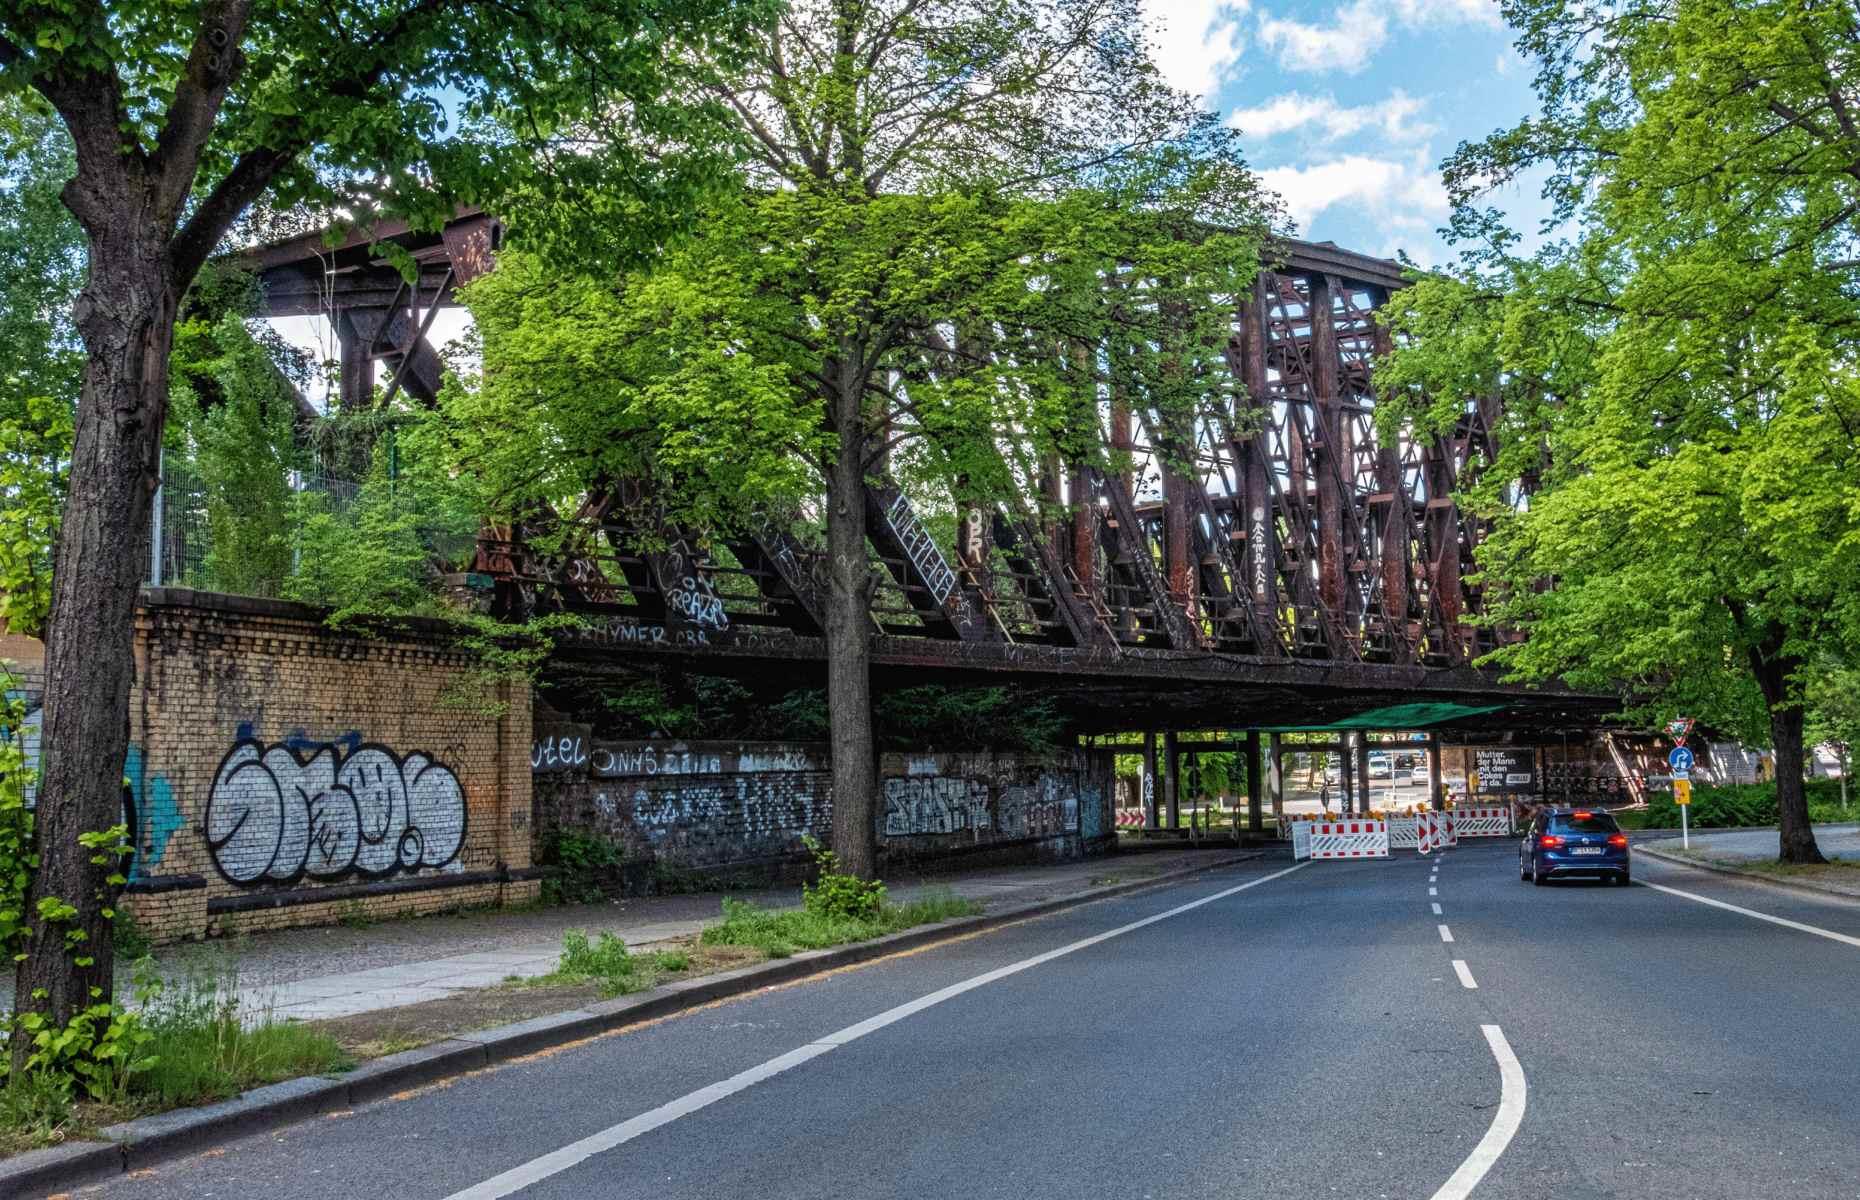 <p>Originally a network of four iron railway bridges constructed between 1890 and 1896, the Liesenbrücken now only count two in their number after the others were replaced with more contemporary overpasses in the mid-Fifties. The remaining couple, despite being protected monuments, have been left to rust without carrying a single train on their tracks for seven decades. They hang above a roundabout just north of Berlin’s city center. A planning application has been made in recent years, proposing the conversion of the largest bridge into a hotel.</p>